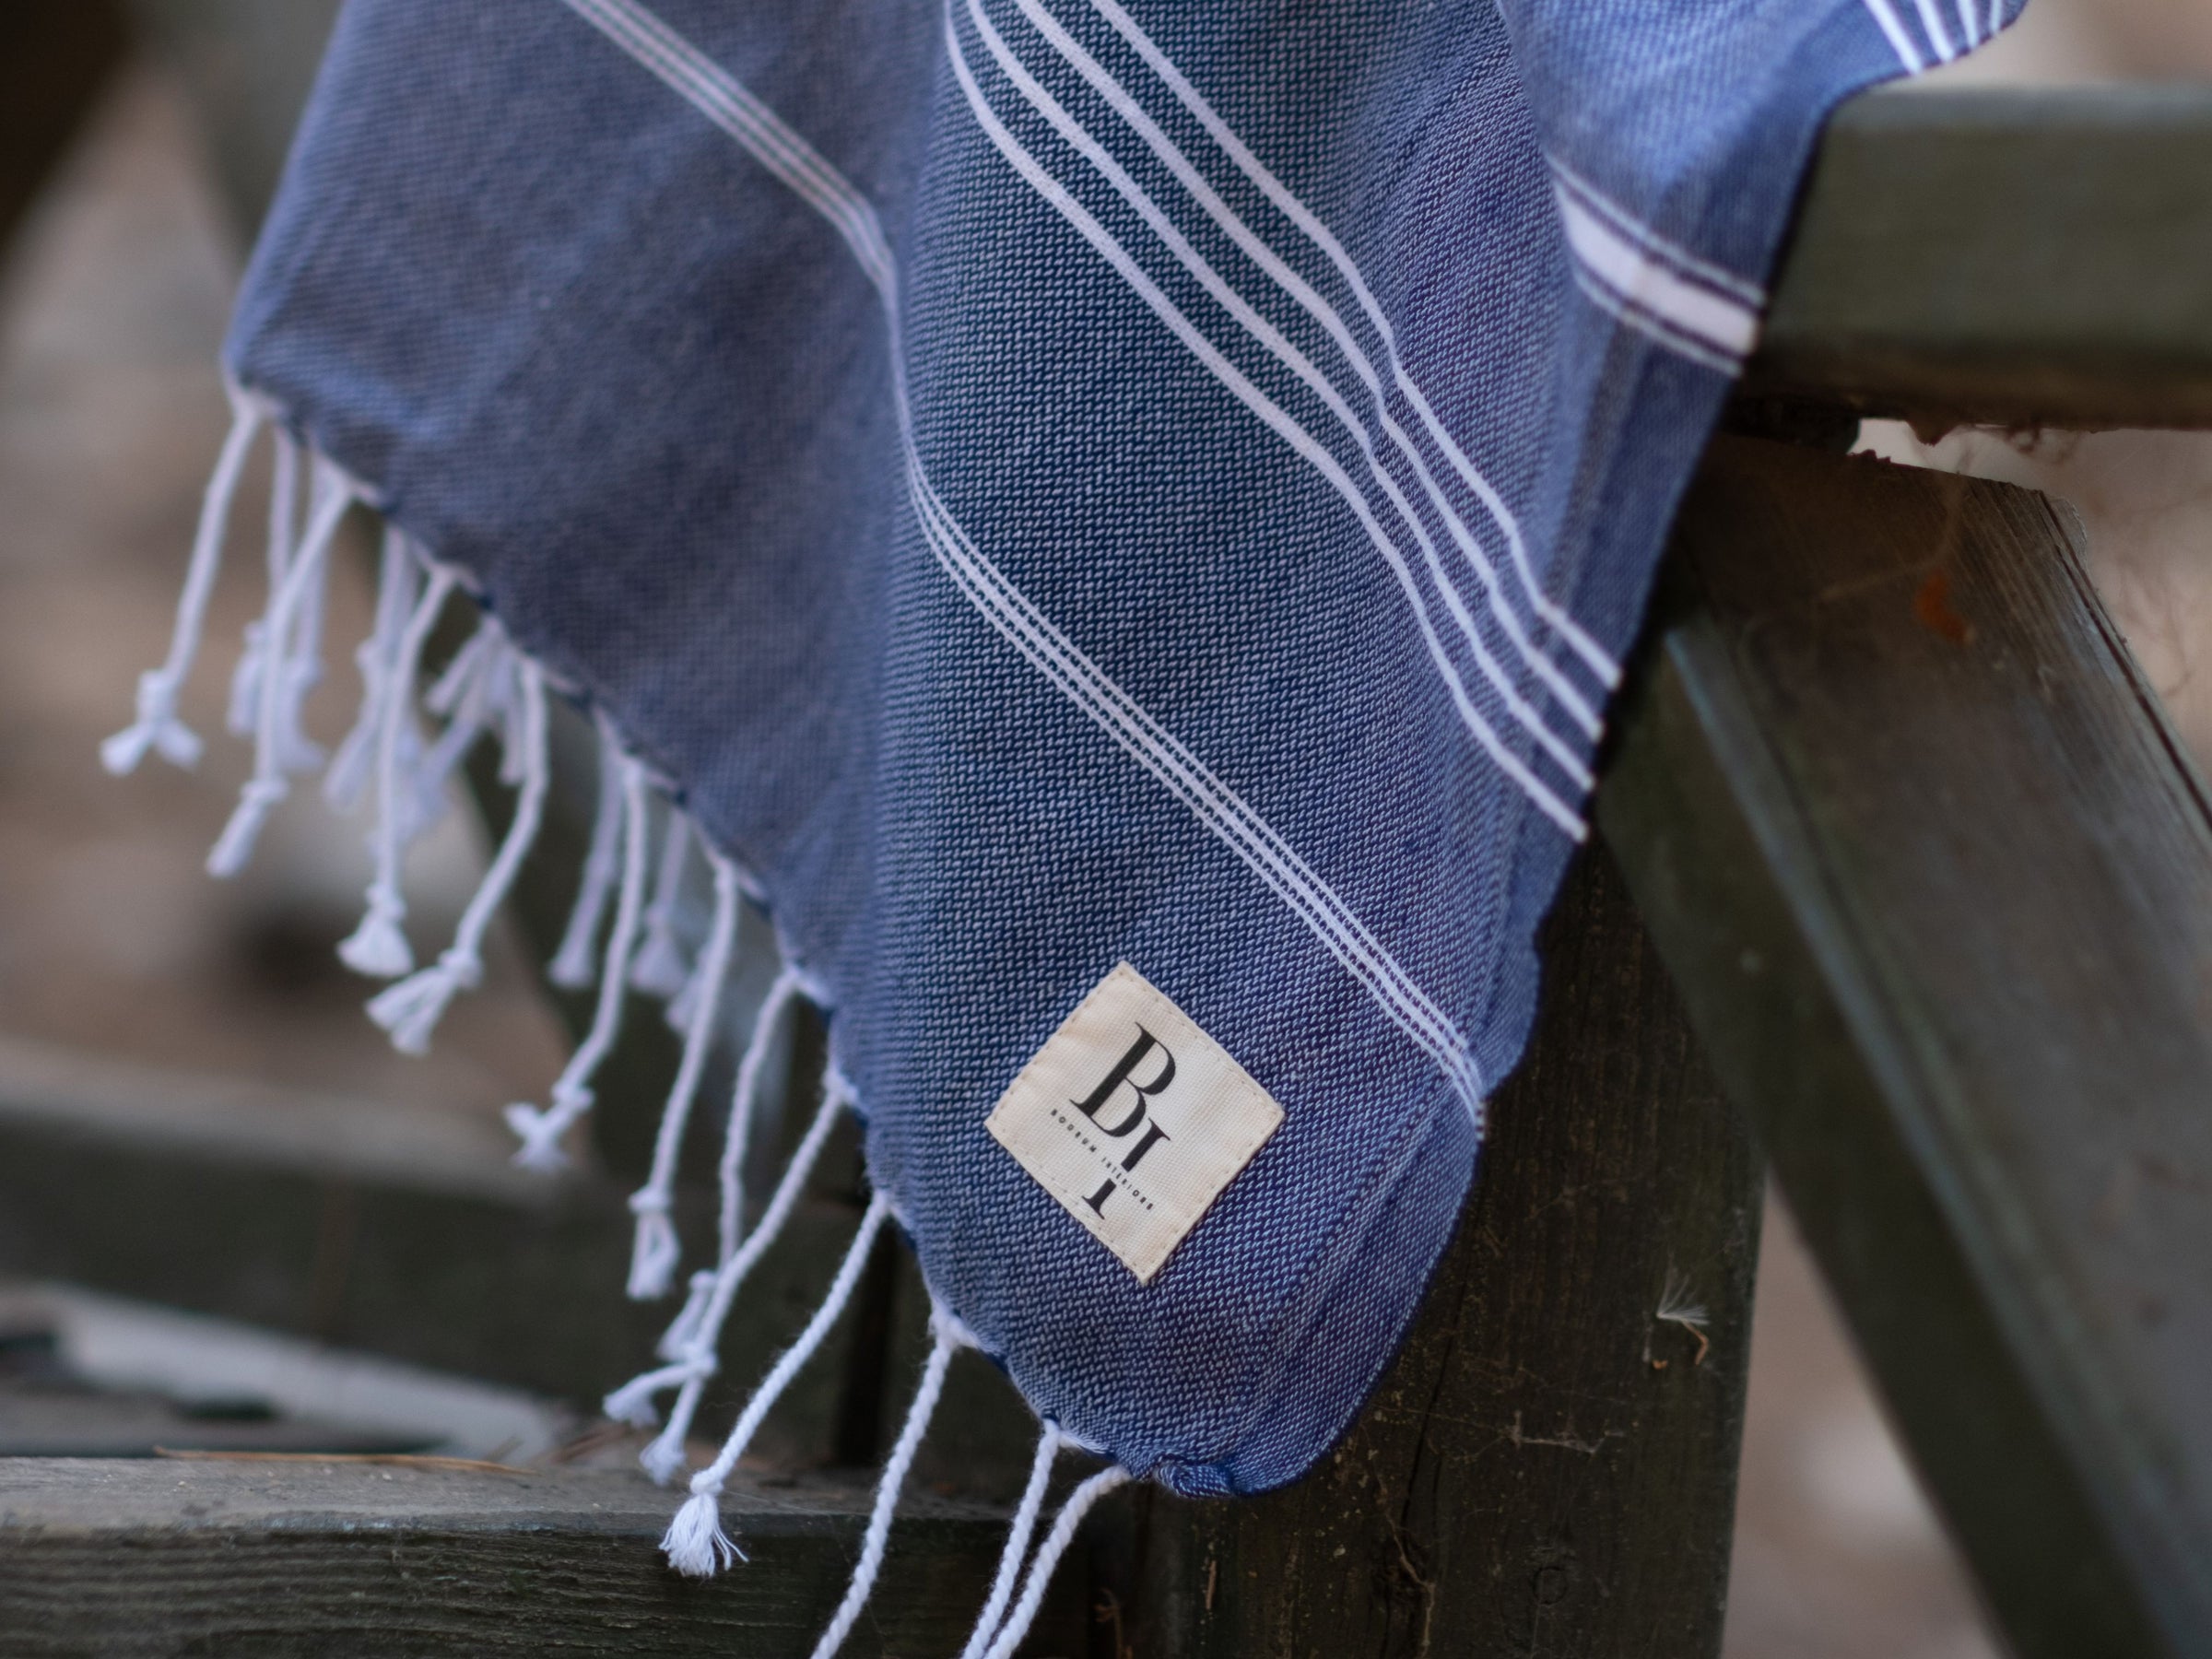 Turkish cotton beach towels are superior because Turkish cotton’s staple is longer than cotton from other regions, making its fabric both lightweight and absorbent